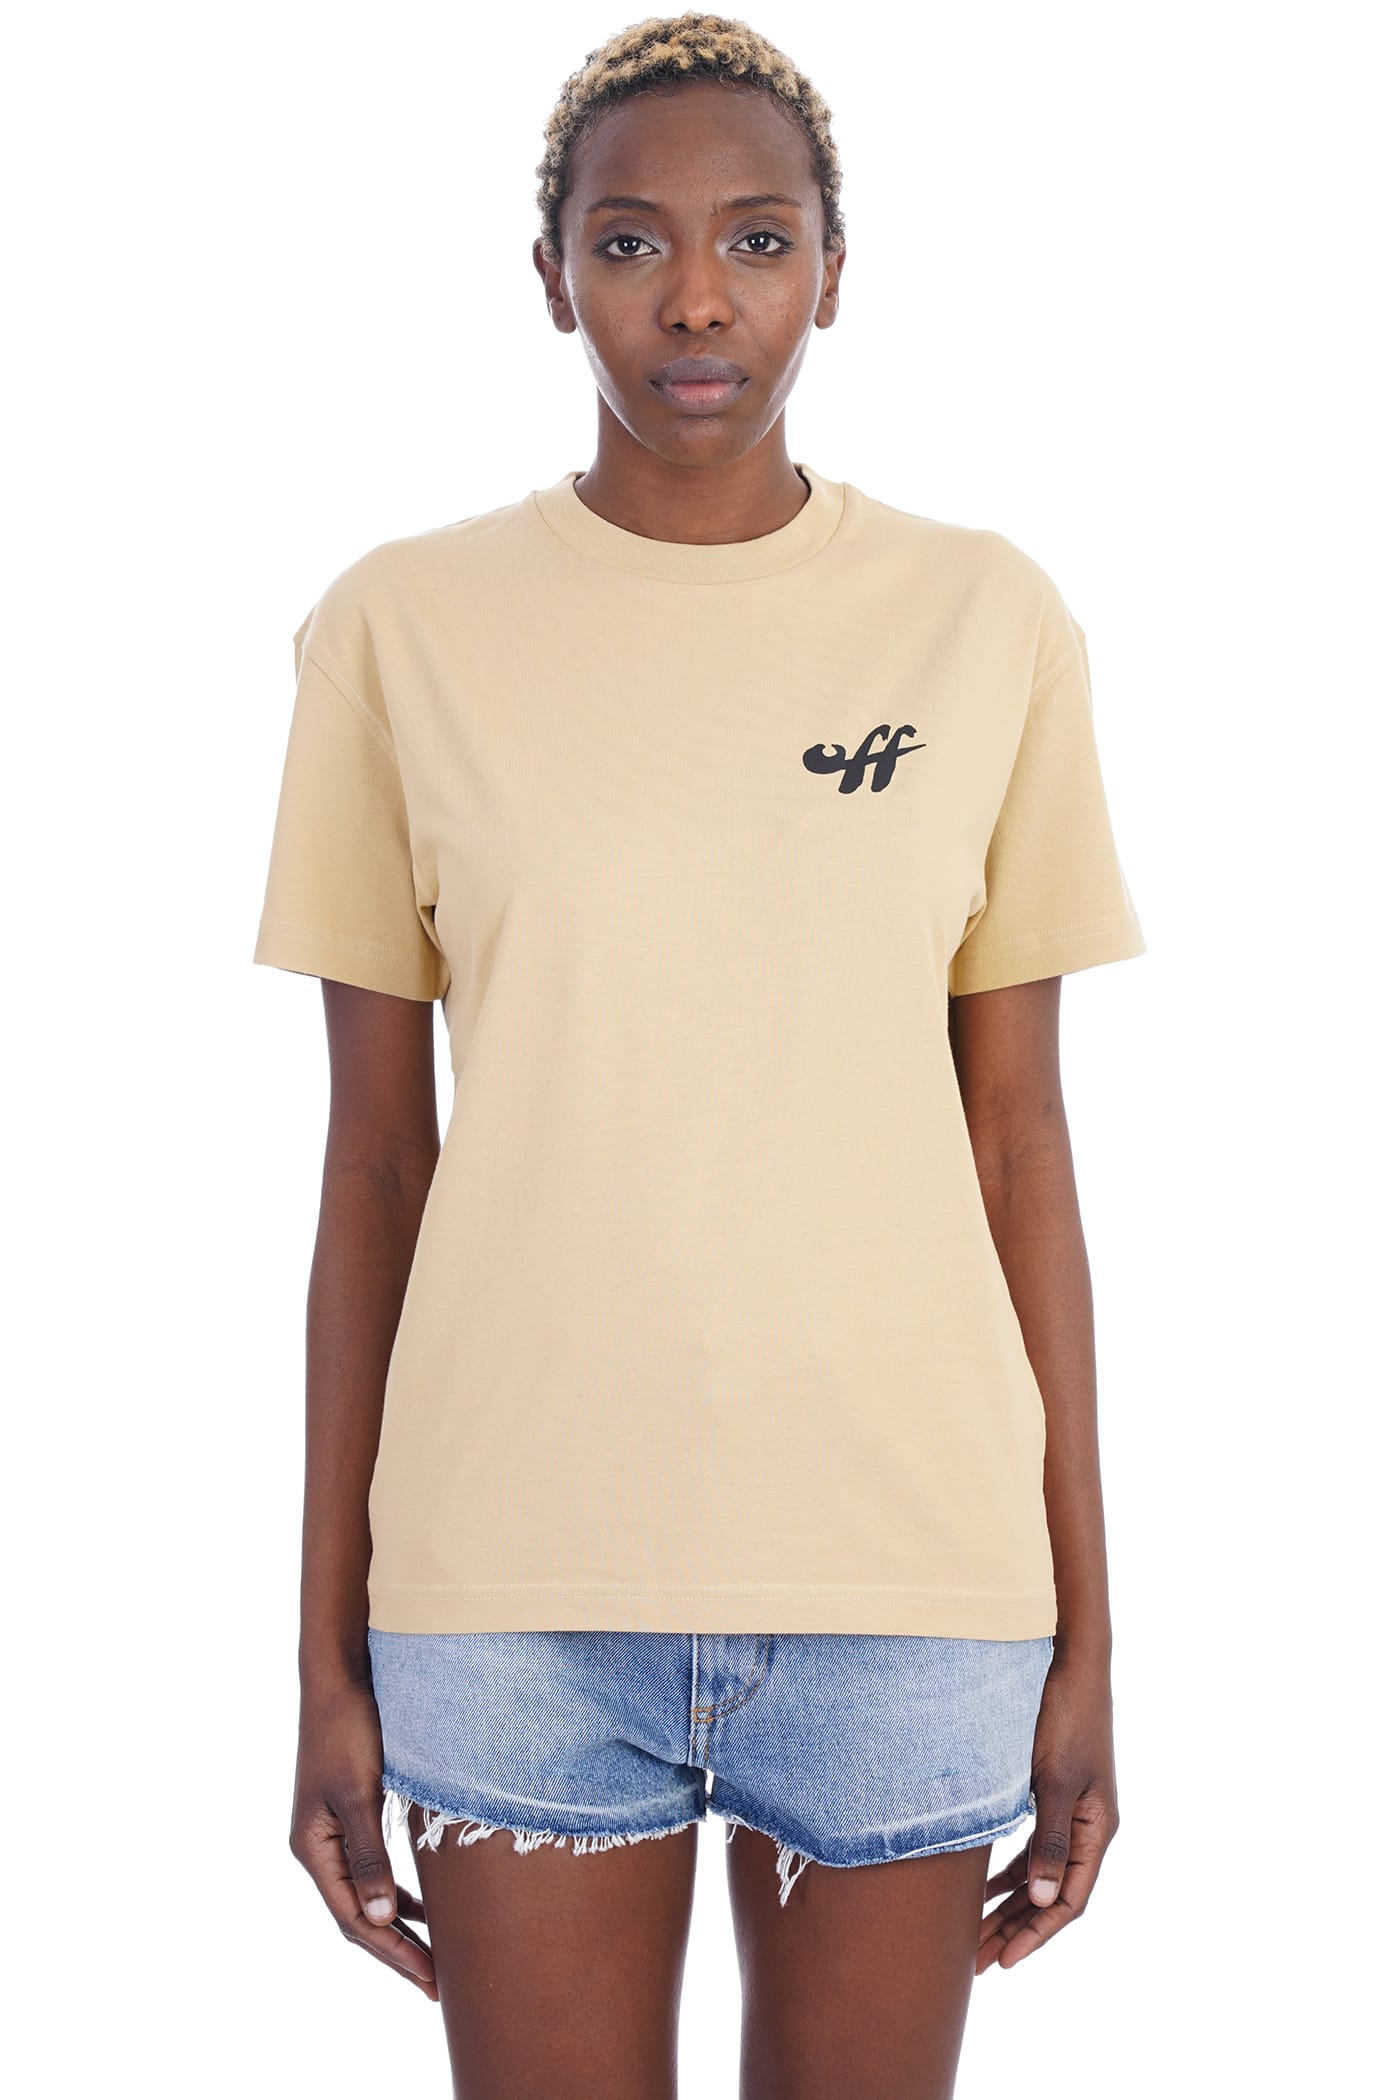 Off-White T-shirt In Camel Cotton